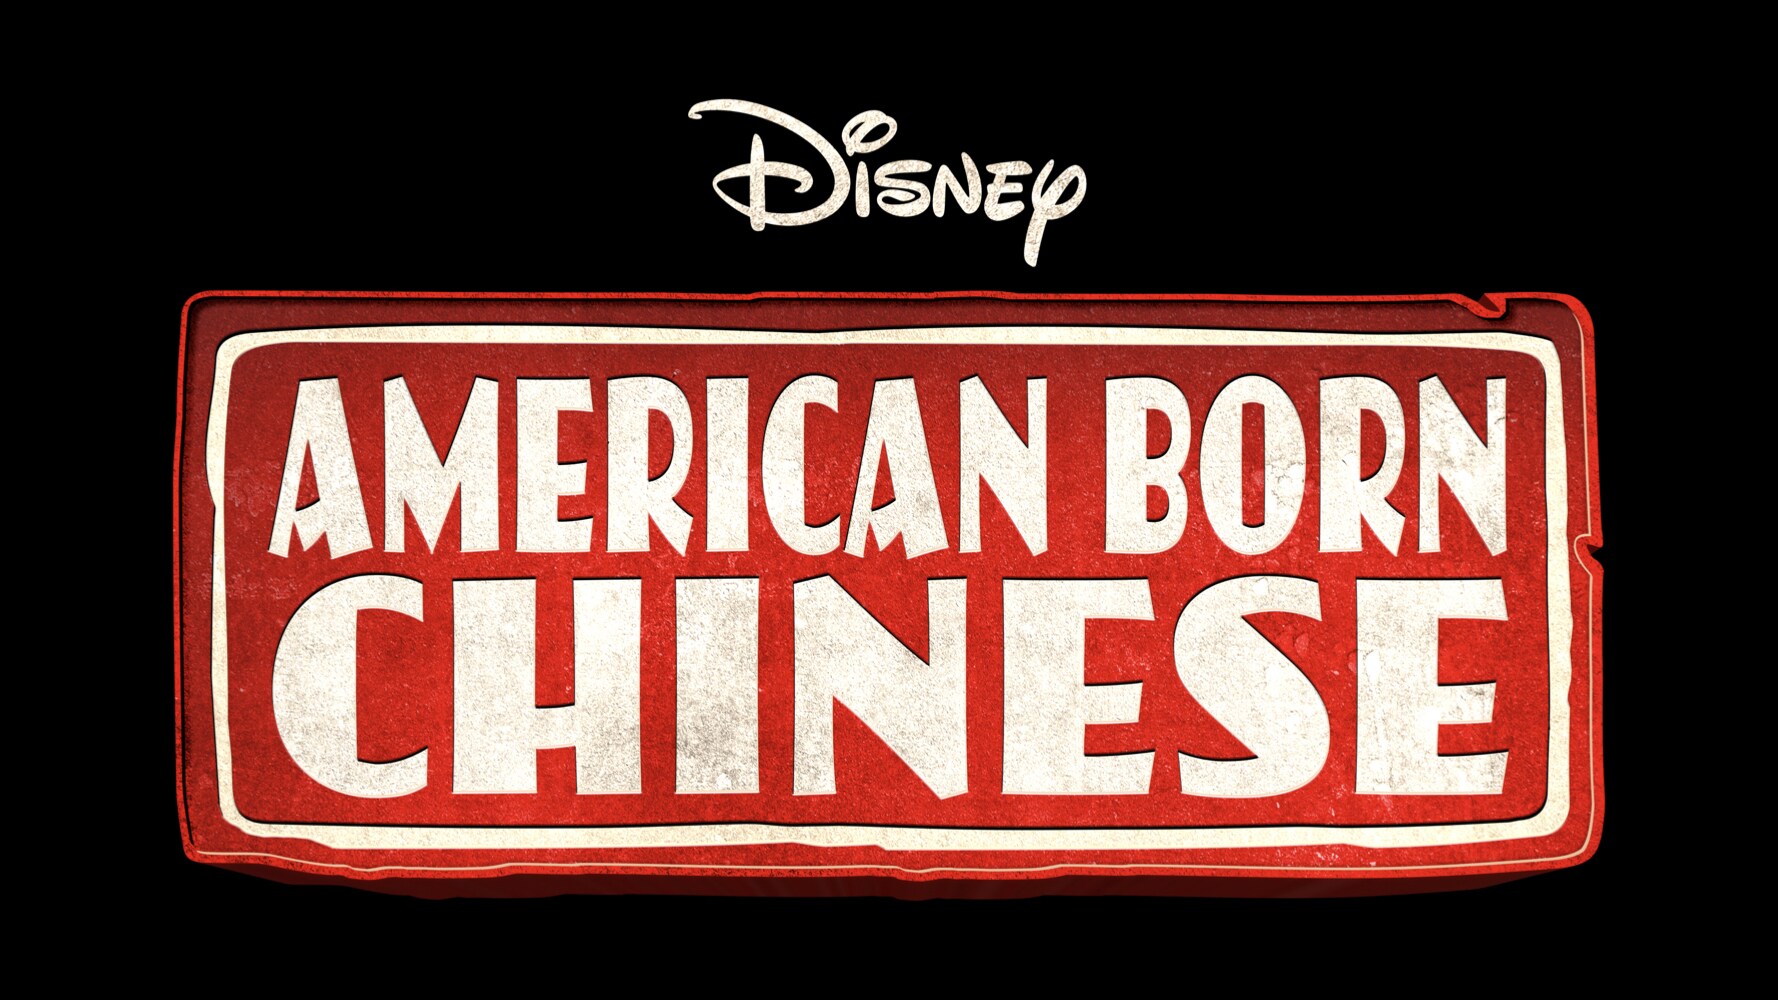 ABC, Hulu, YouTube & Roku To Present Episodes Of The Critically Acclaimed Disney+ Original Series “American Born Chinese”